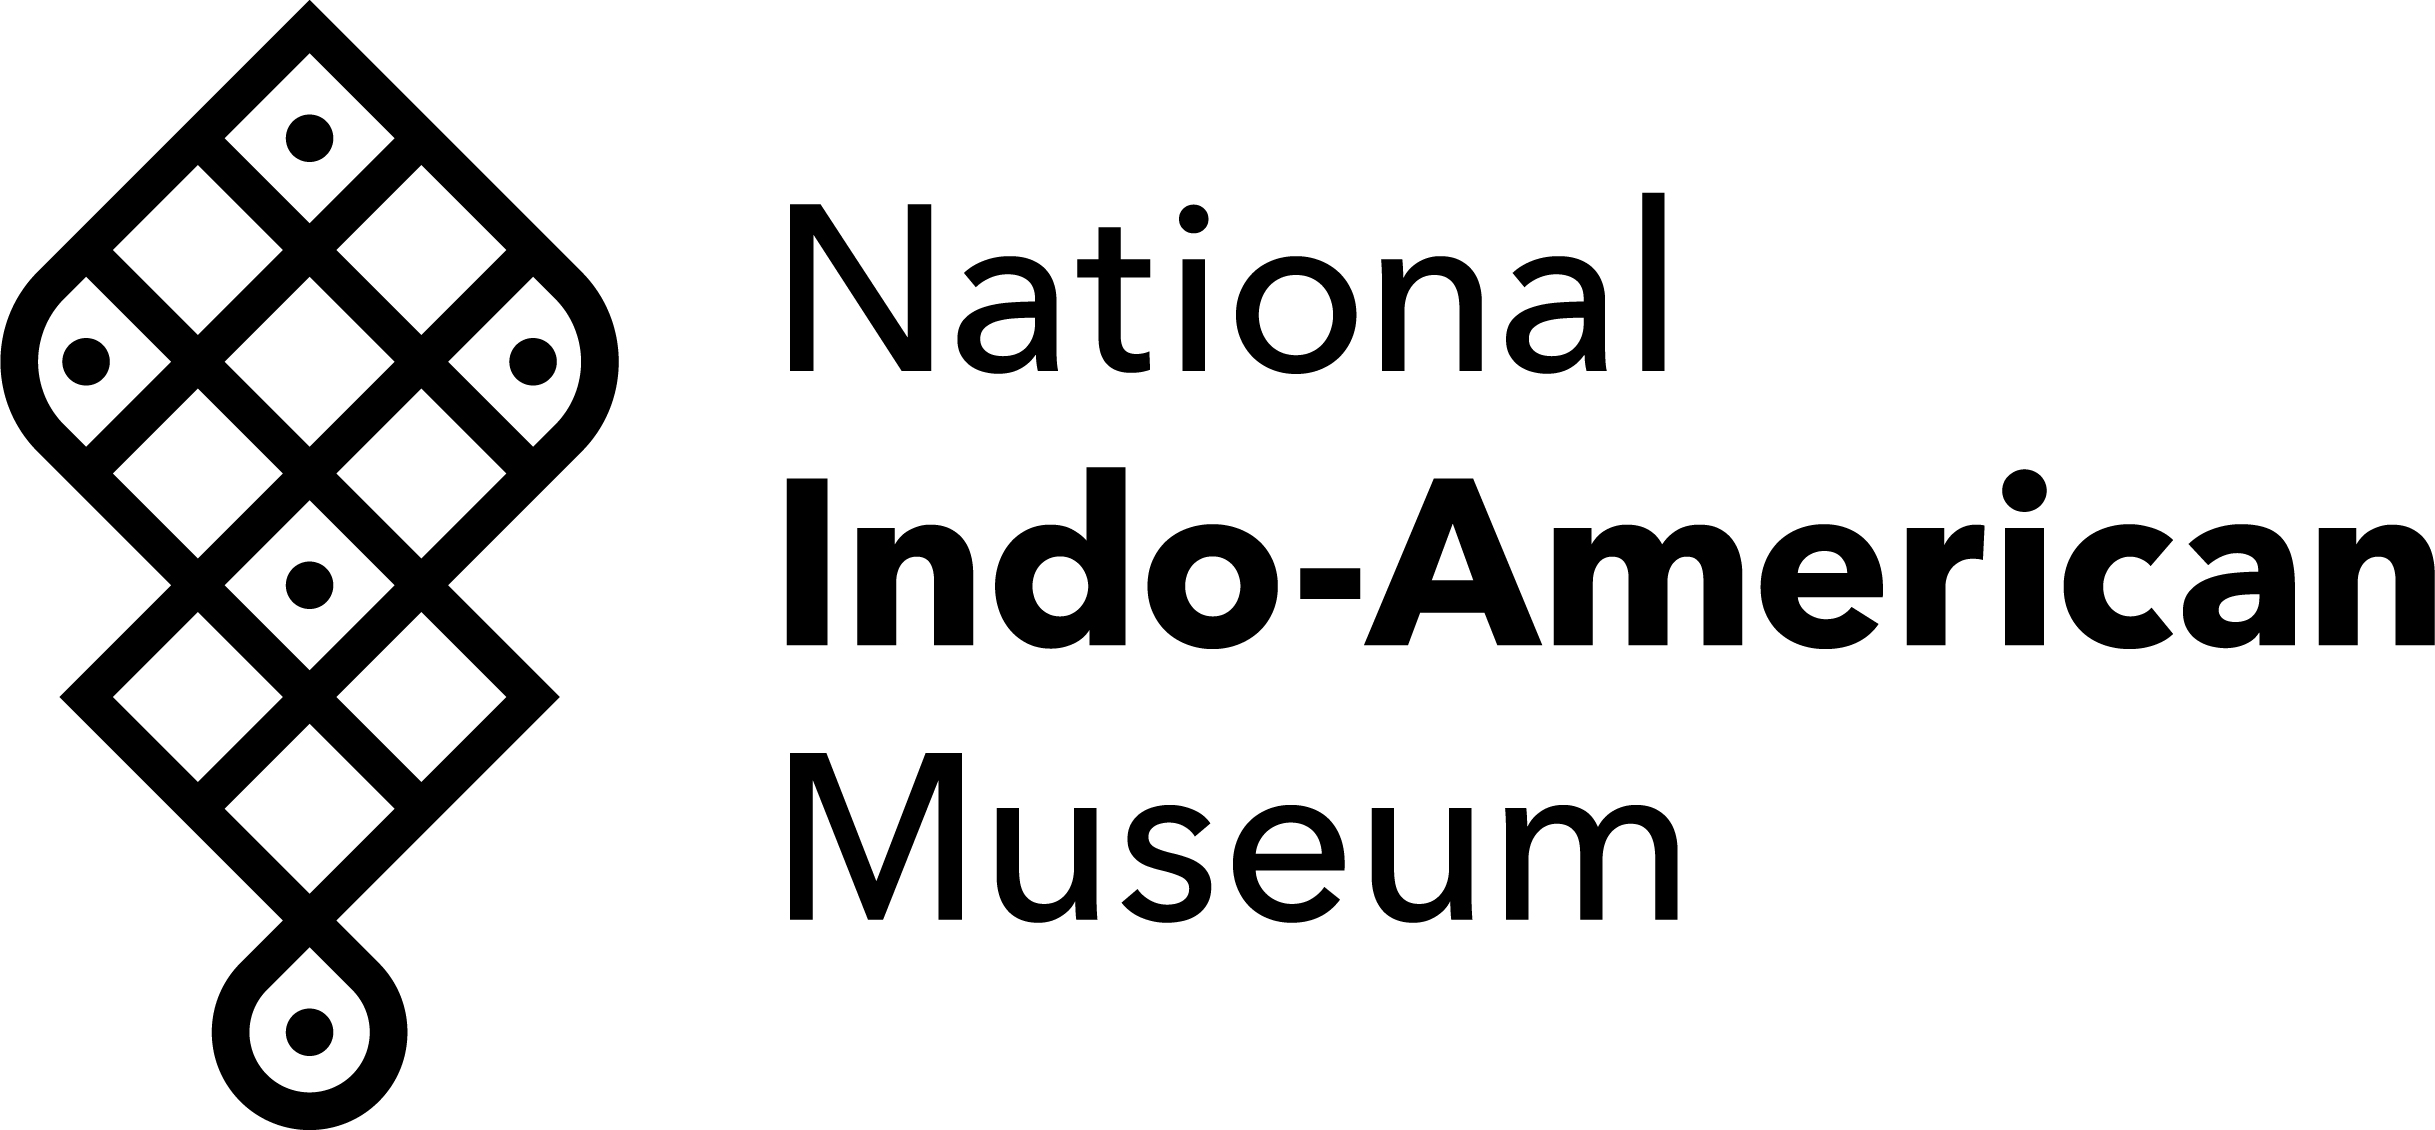 National Indo-American Museum